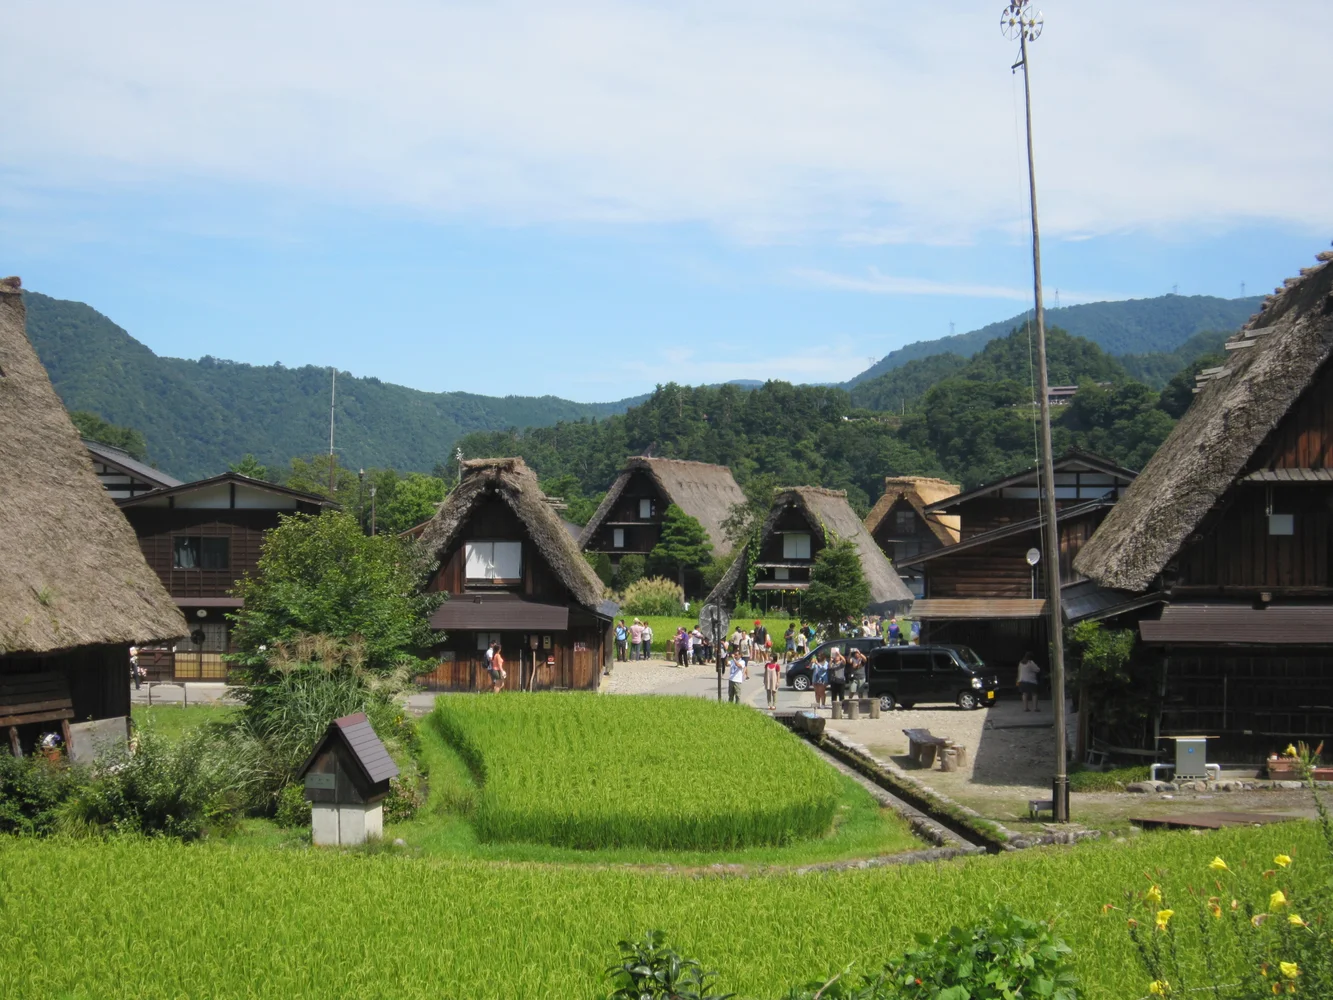 Starting from Kanazawa, where rich history and tradition are alive, we will guide you on a luxurious day trip bus tour that goes around the World Heritage Site "Shirakawa-go" and the charming "Hida Takayama"!